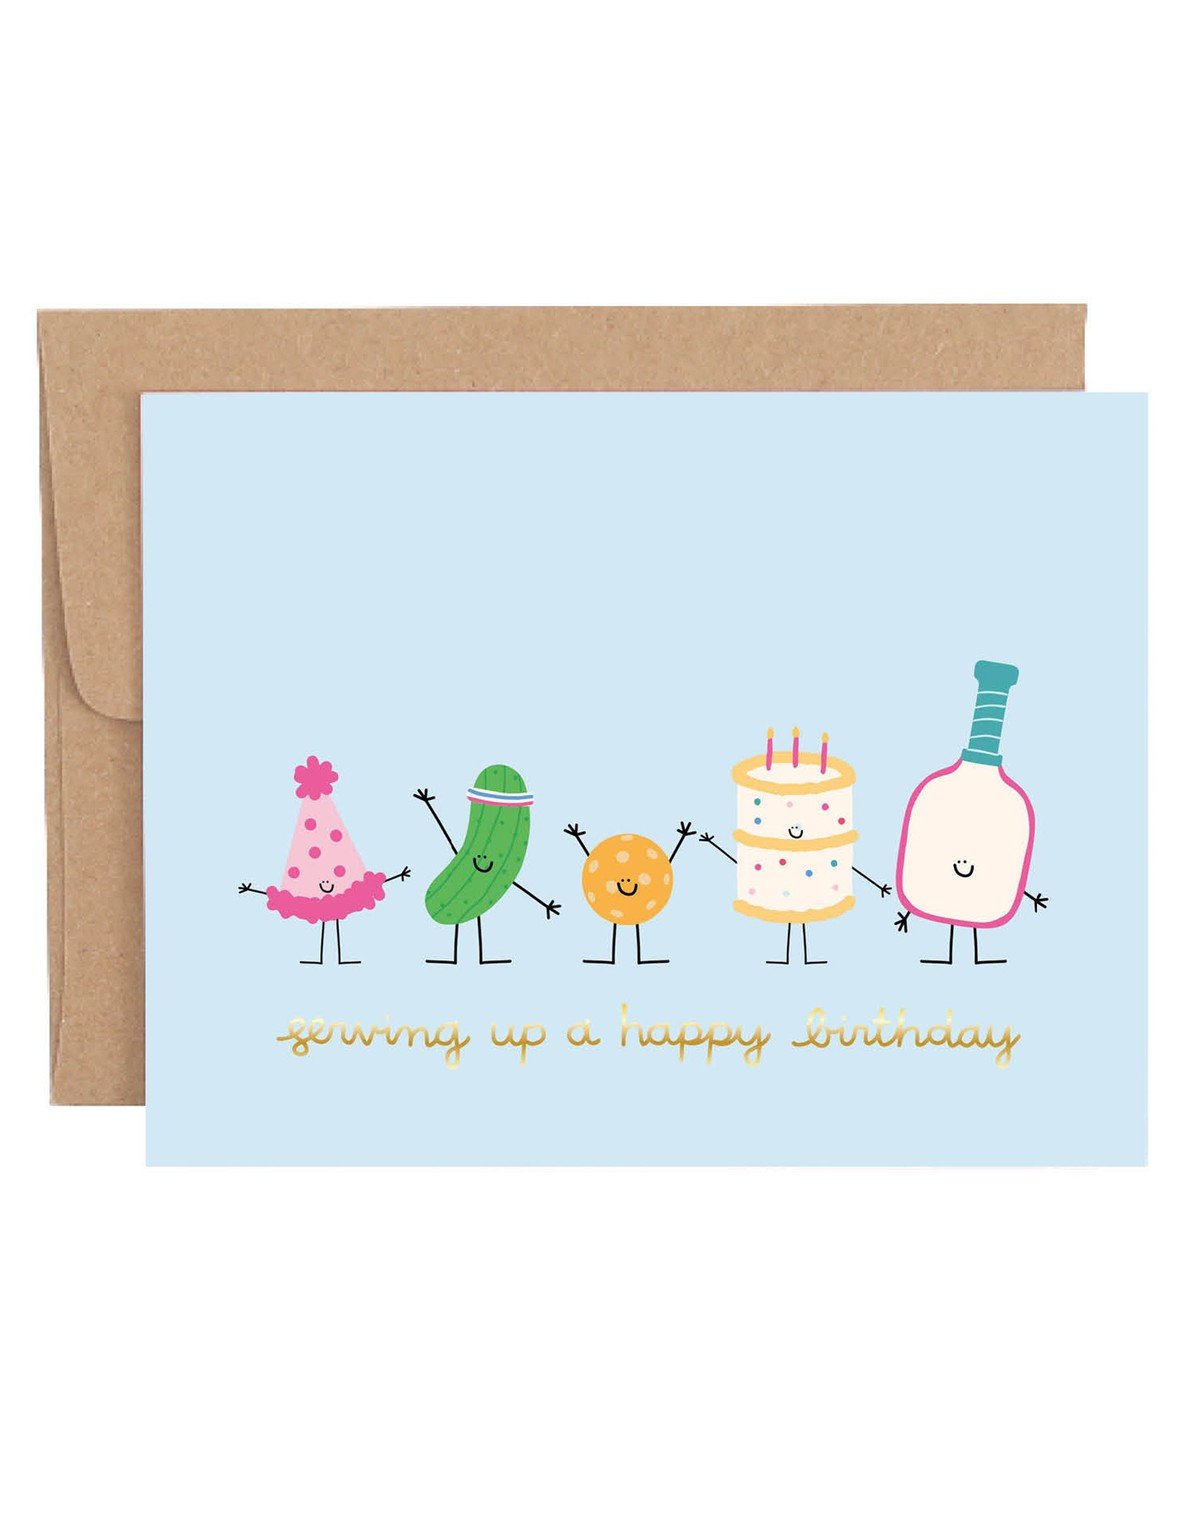 Serving Up A Happy Birthday Pickleball Greeting Card item